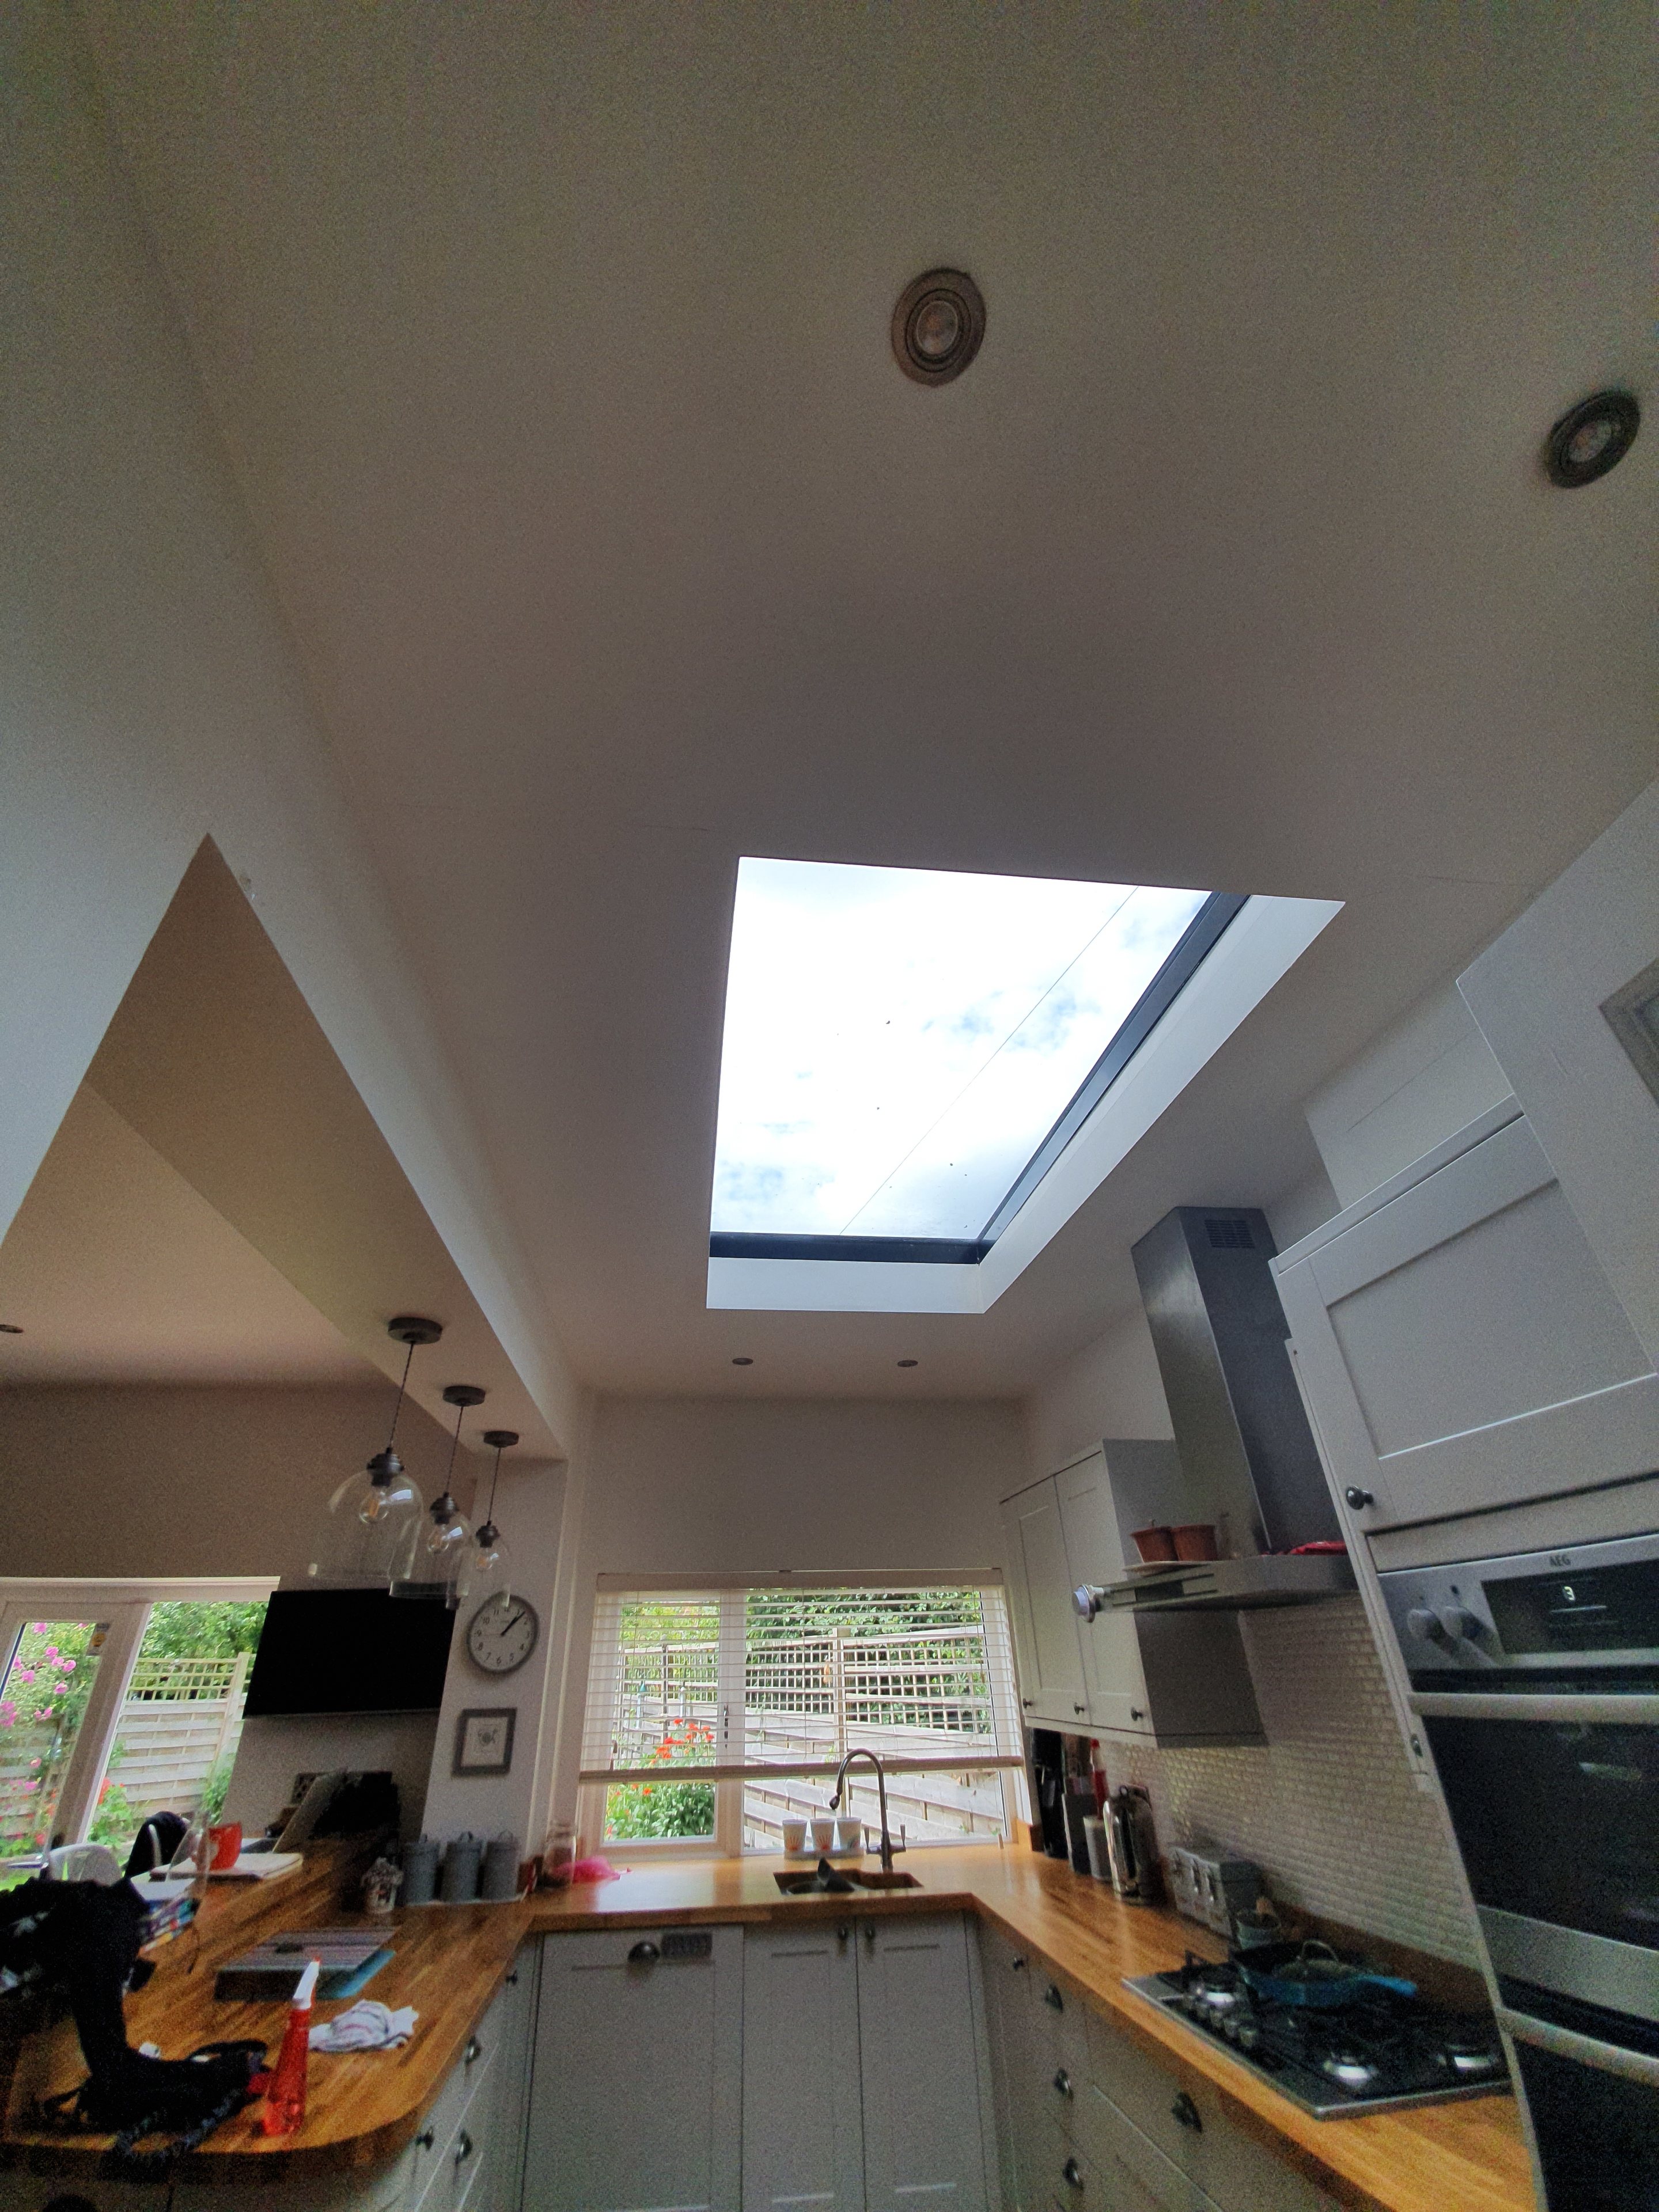 Roof lantern or flat rooflight? - Page 1 - Homes, Gardens and DIY - PistonHeads